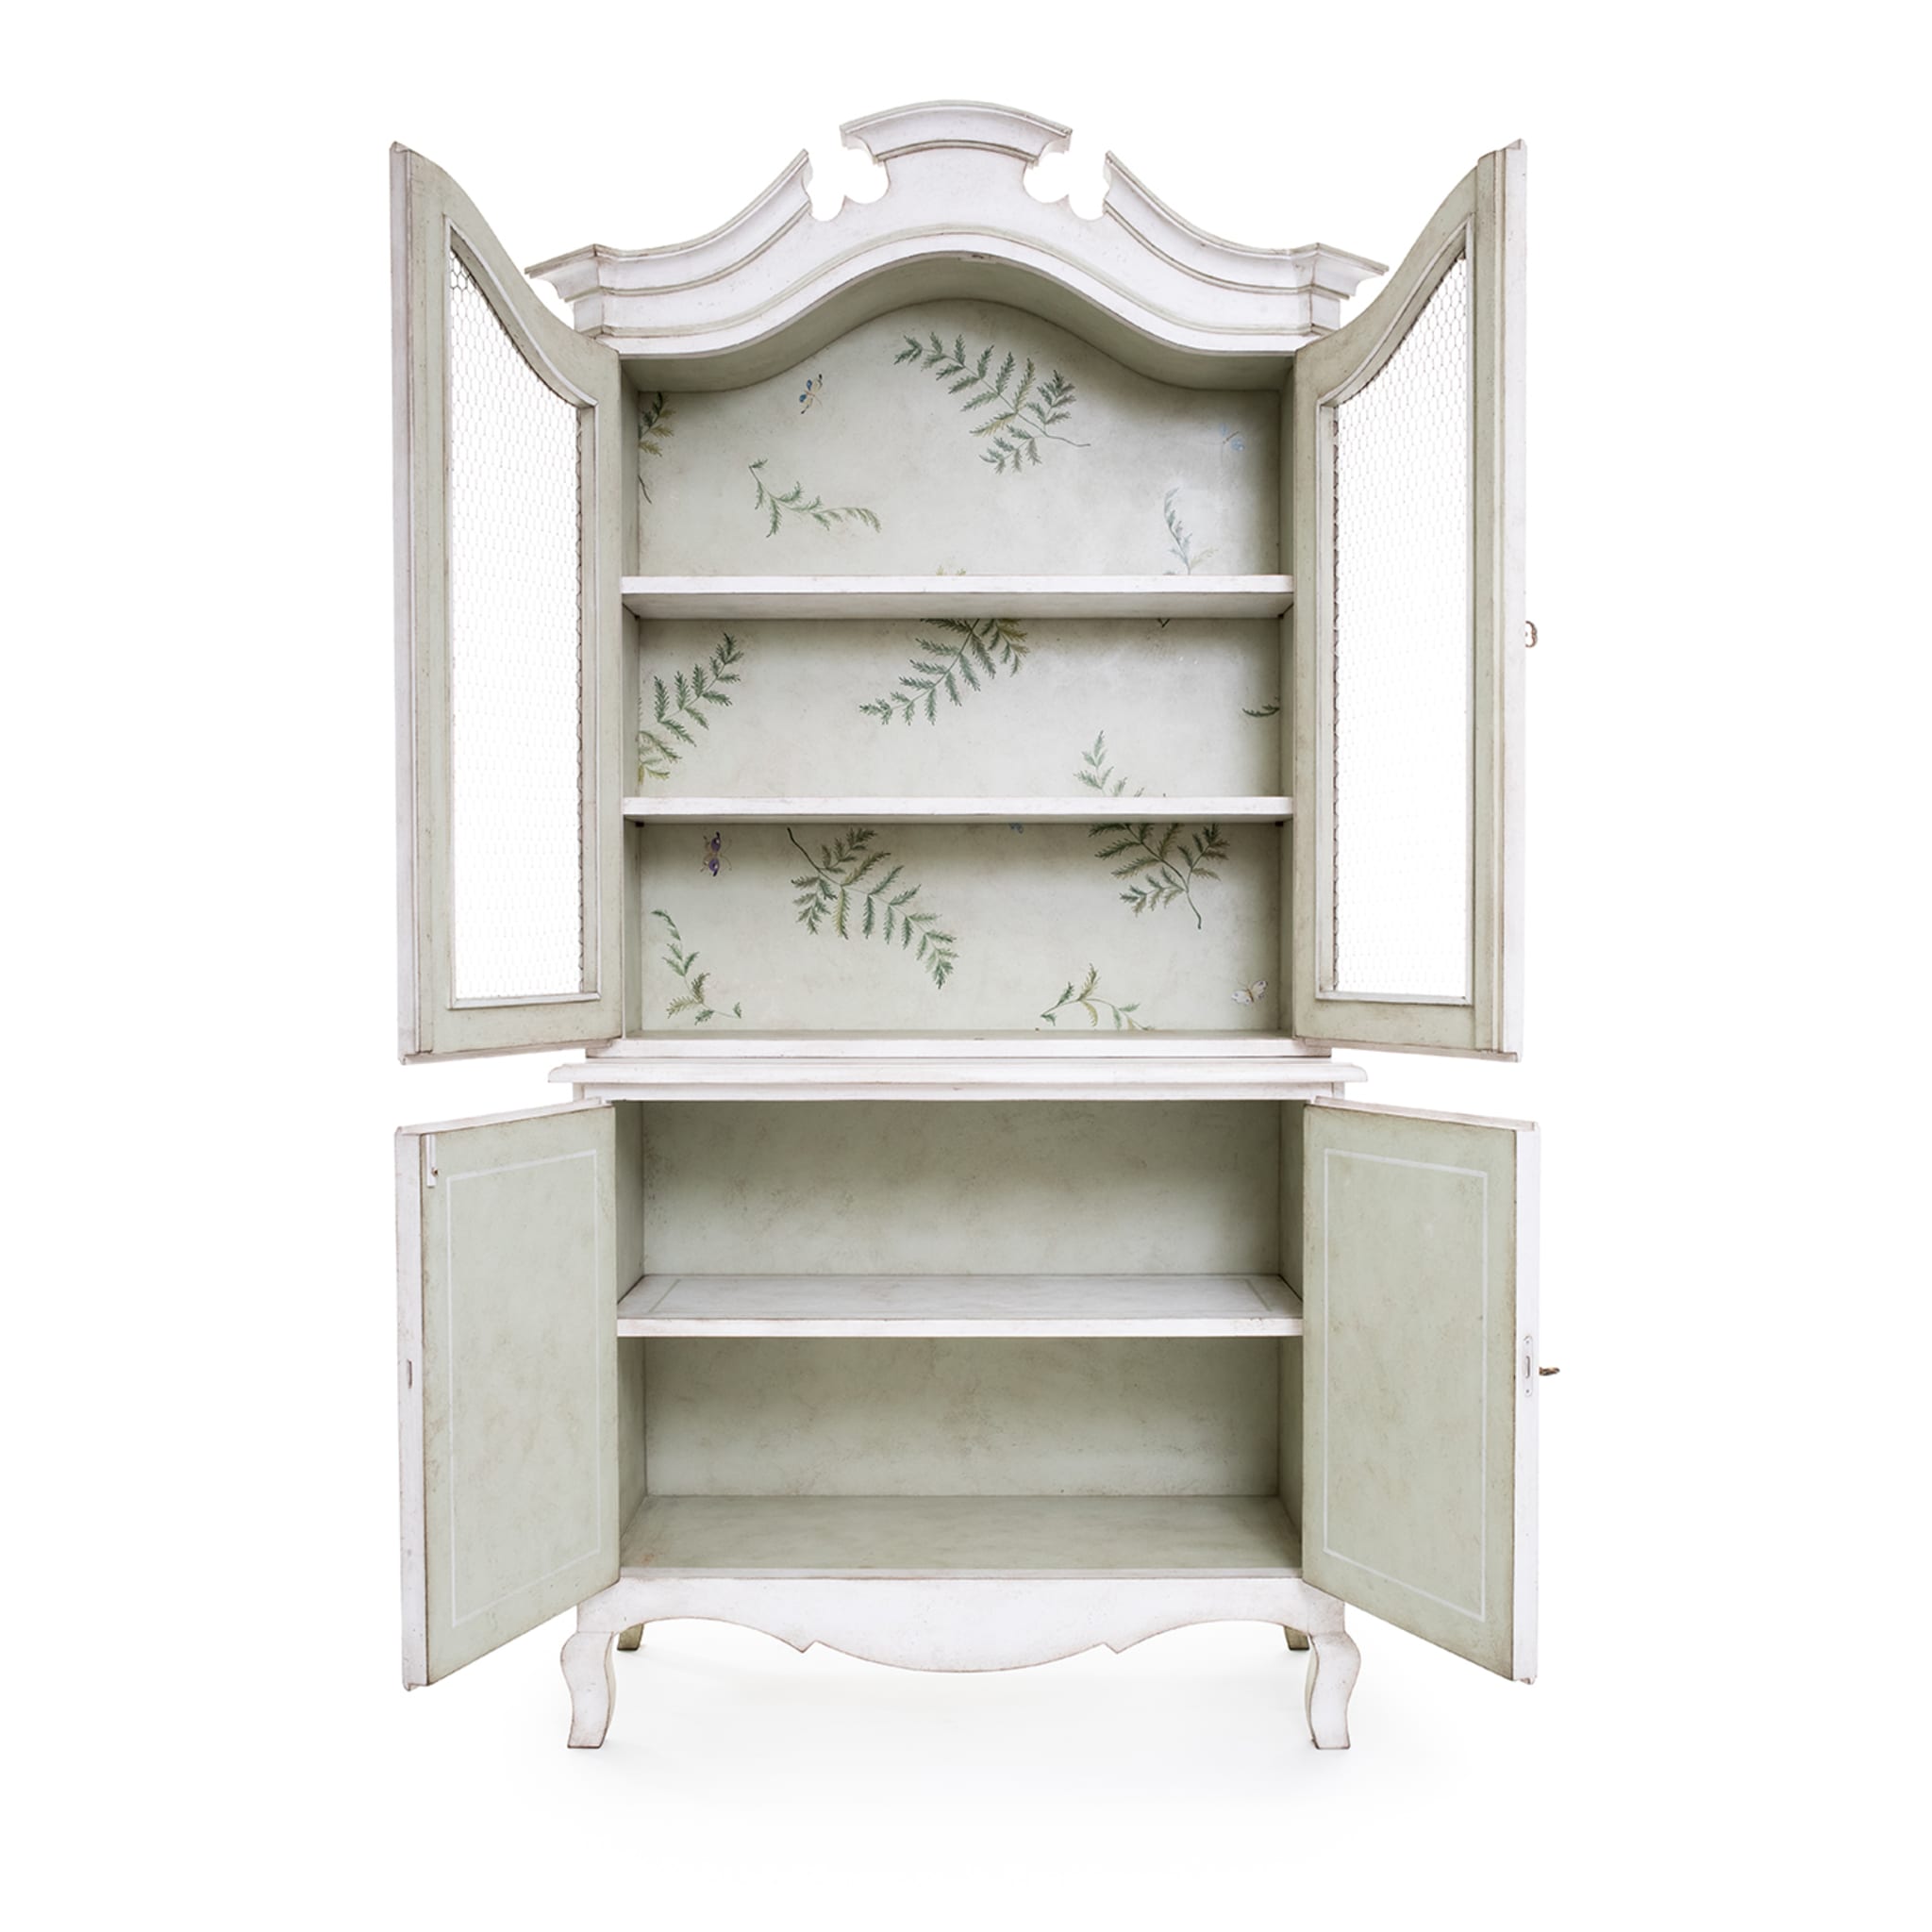 Chalky White Padua Hutch with Ferns and Butterflies - Alternative view 4